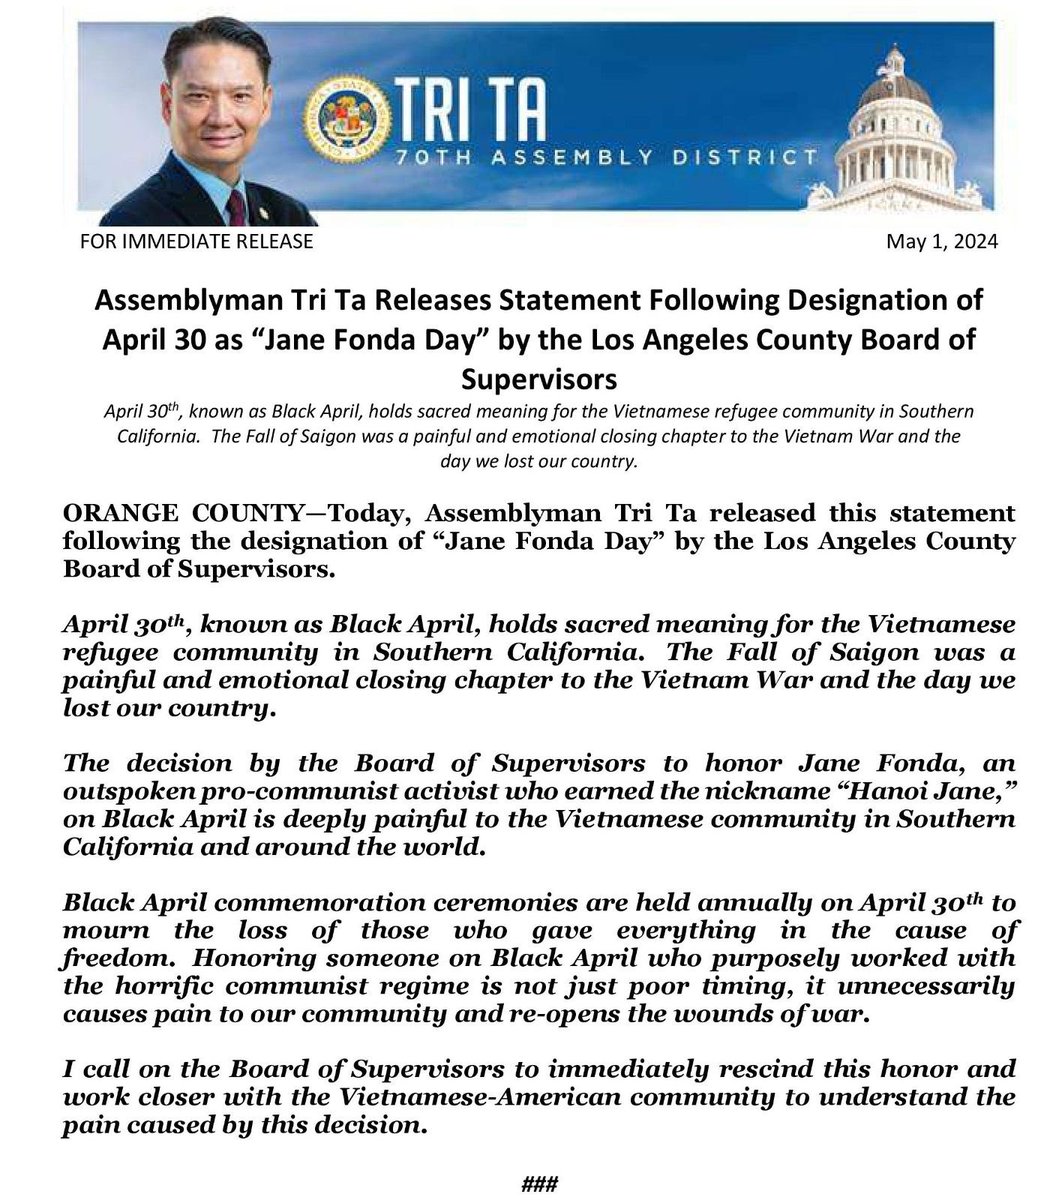 I call on the Los Angeles Board of Supervisors to immediately rescind this decision to honor Jane Fonda (Hanoi Jane) on Black April and work closer with the Vietnamese-American community to understand the pain it caused. @LACountyBOS